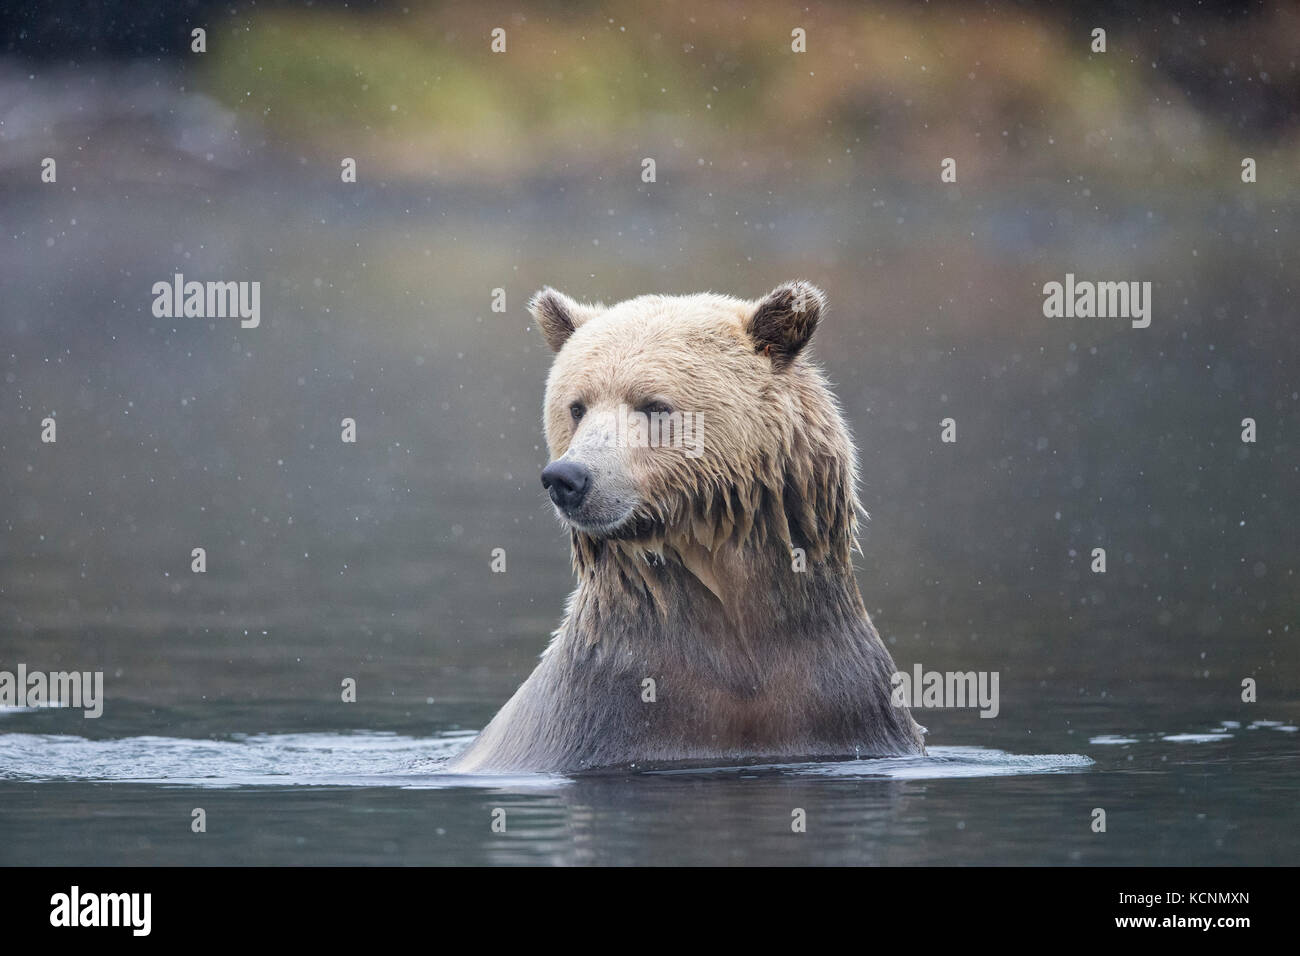 Grizzly bear (Ursus arctos horribilis), female in early snowfall, Chilcotin Region, British Columbia, Canada. Stock Photo